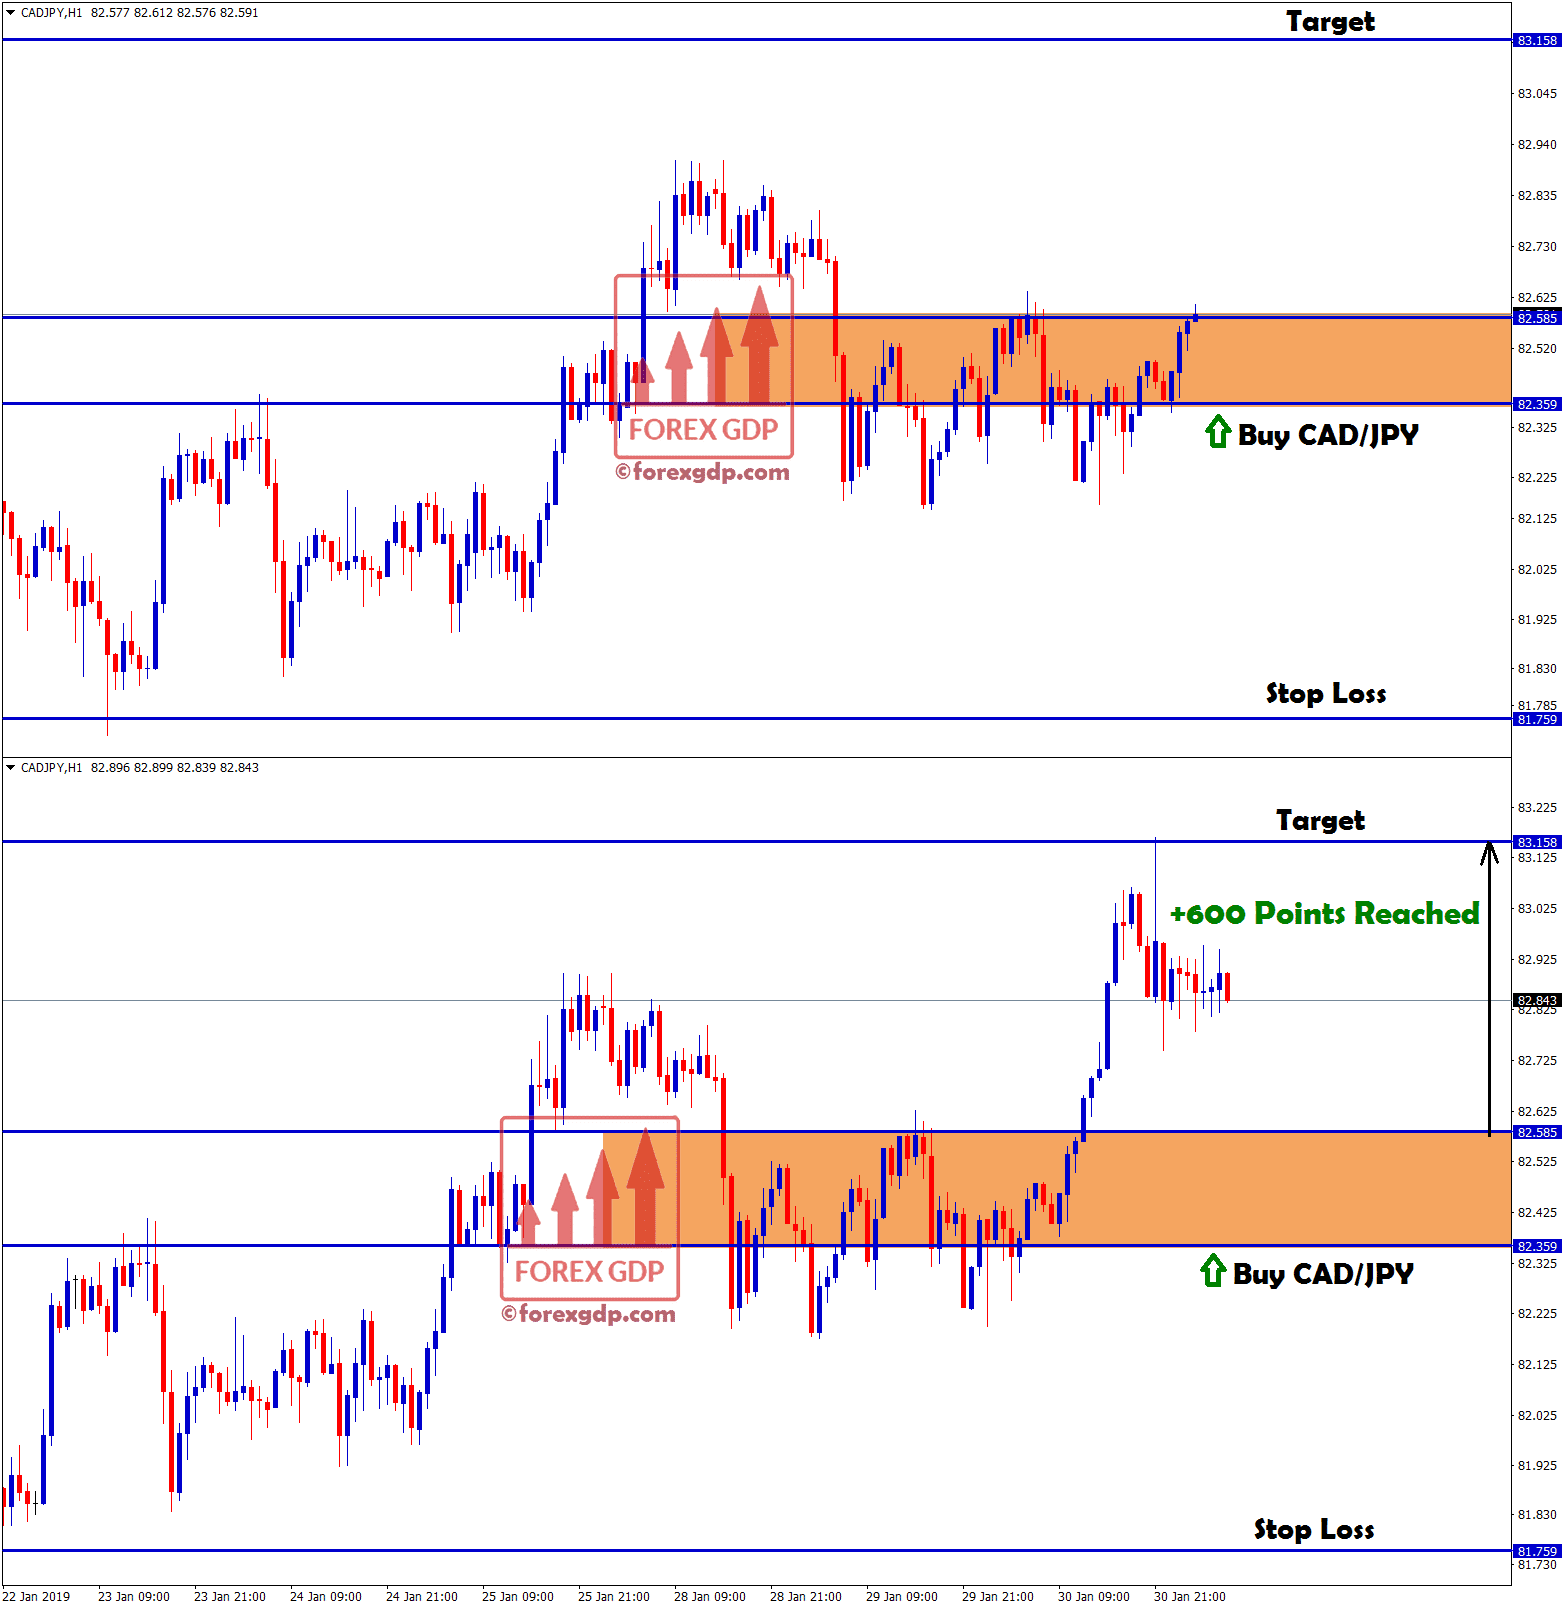 cadjpy buy signal hits target with +600 points